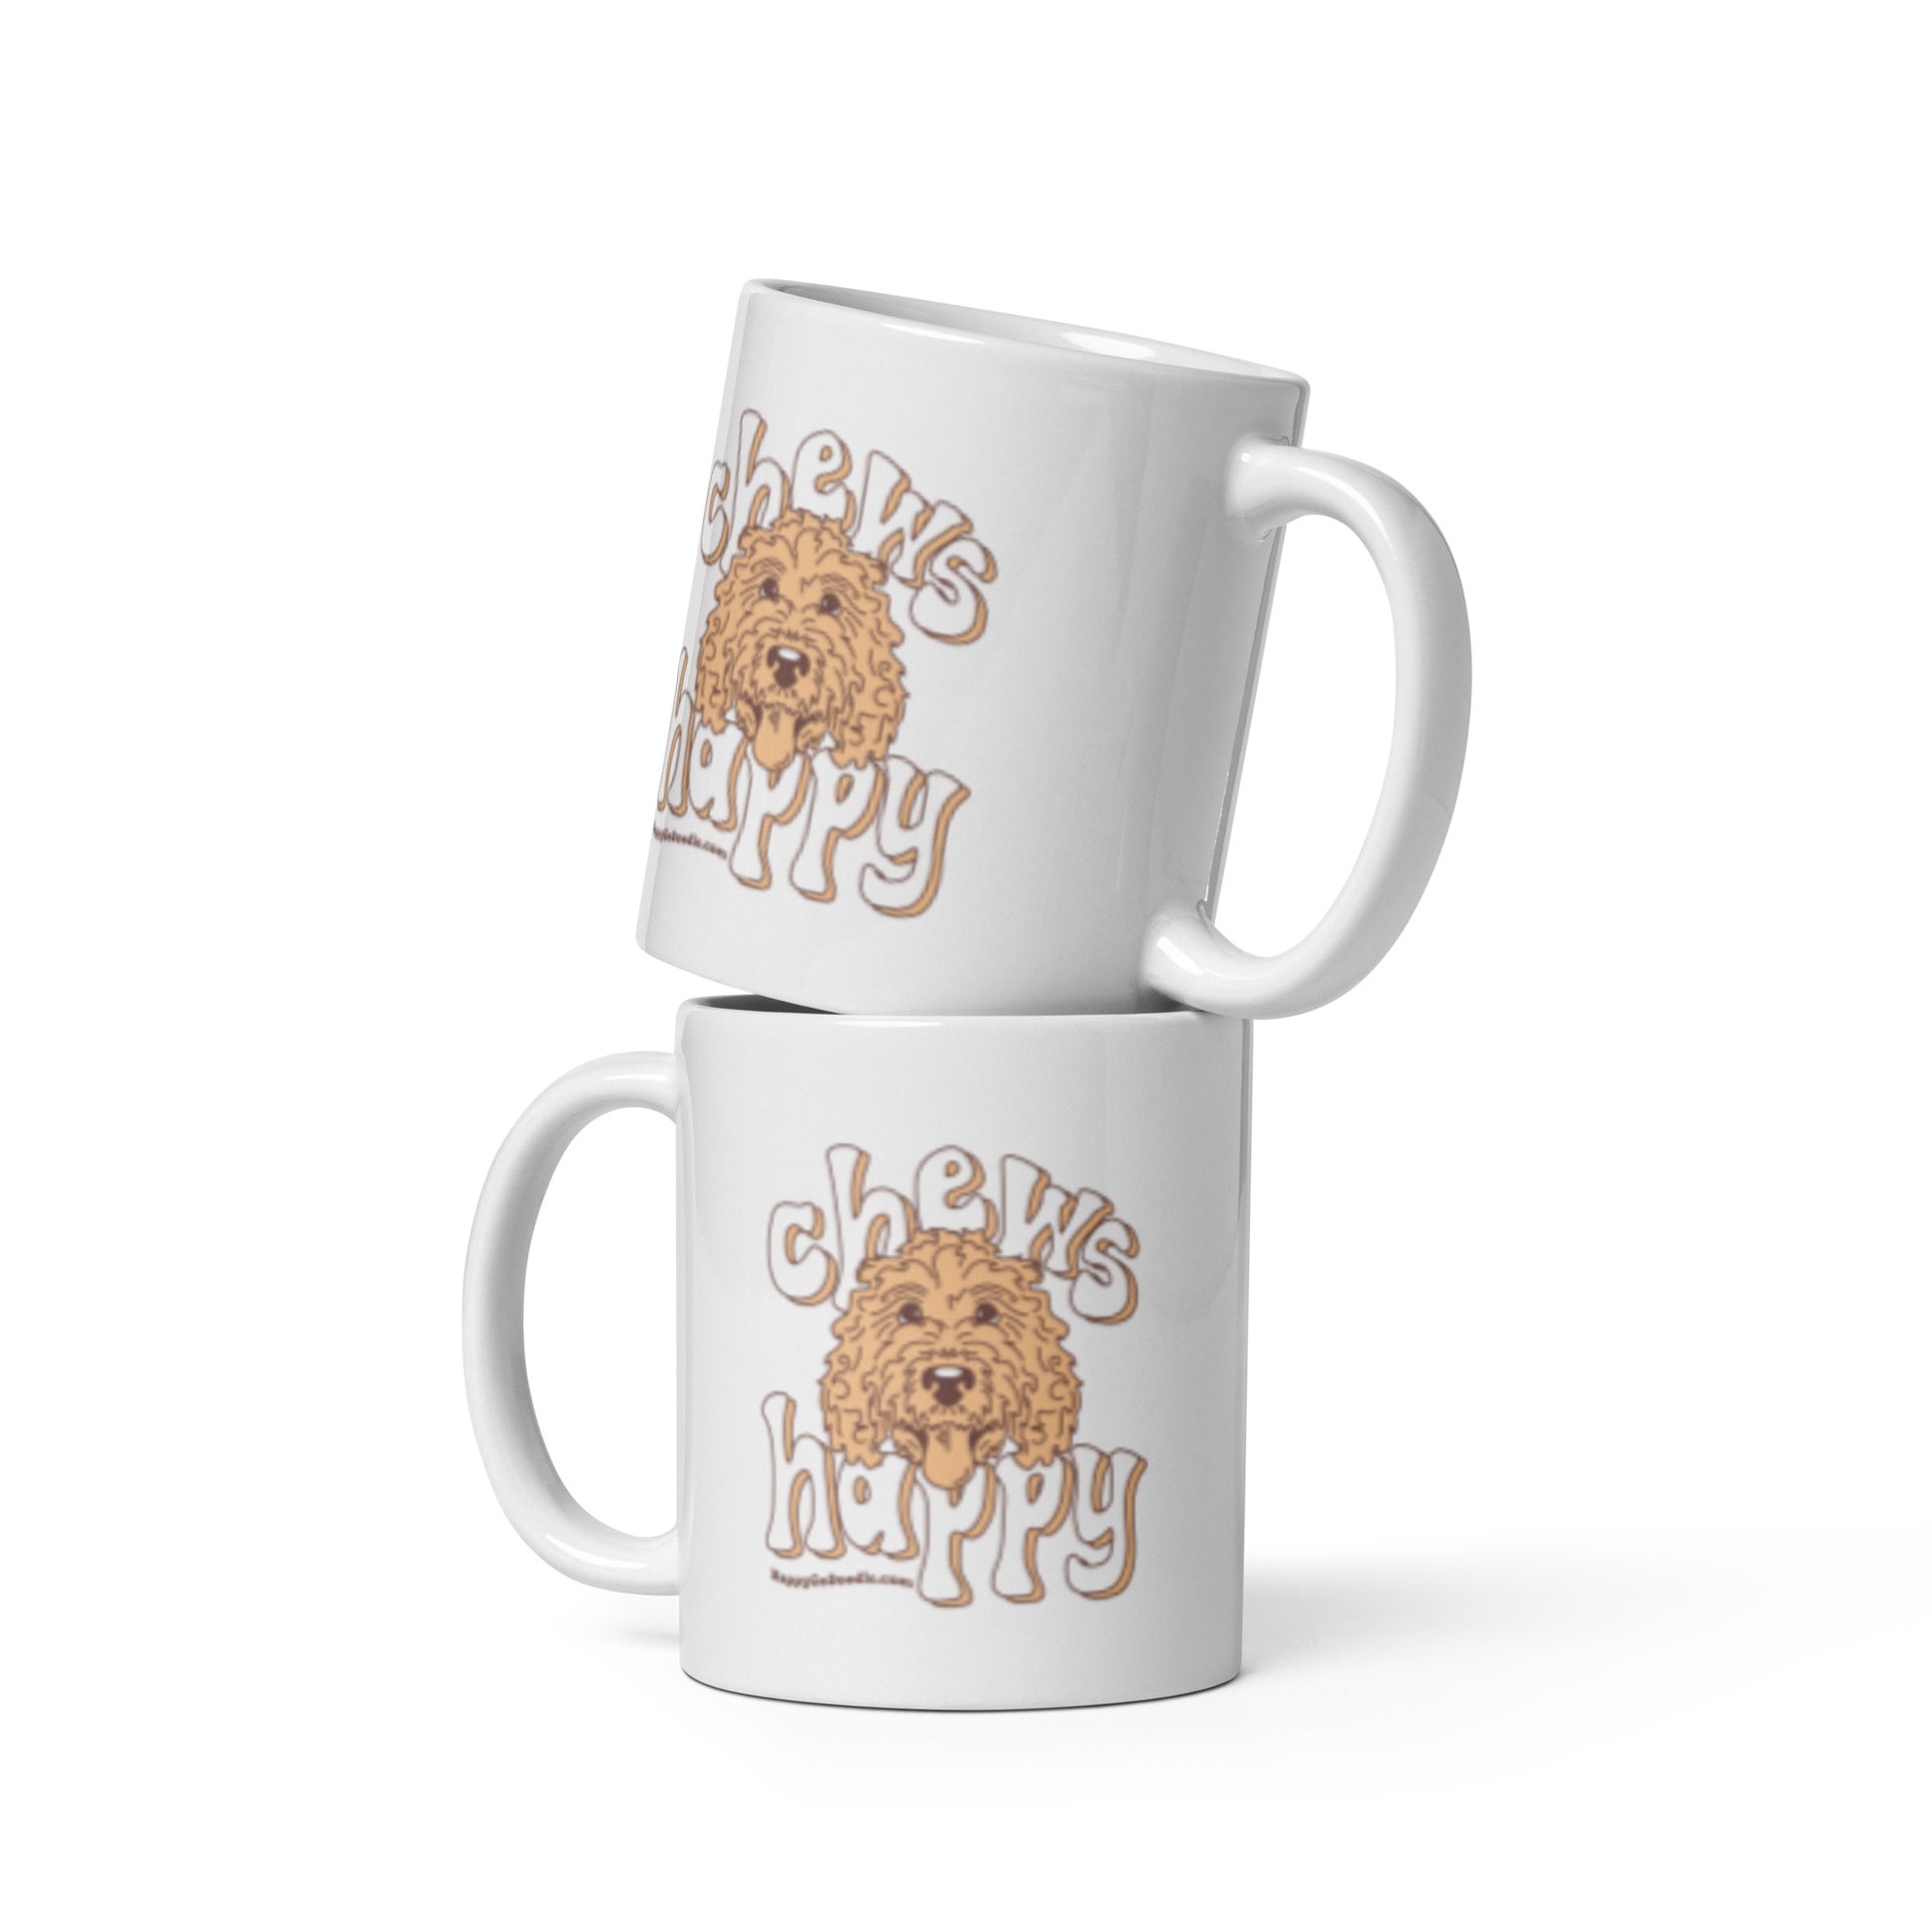 White ceramic coffee mug with Goldendoodle dogs face and words Chews Happy